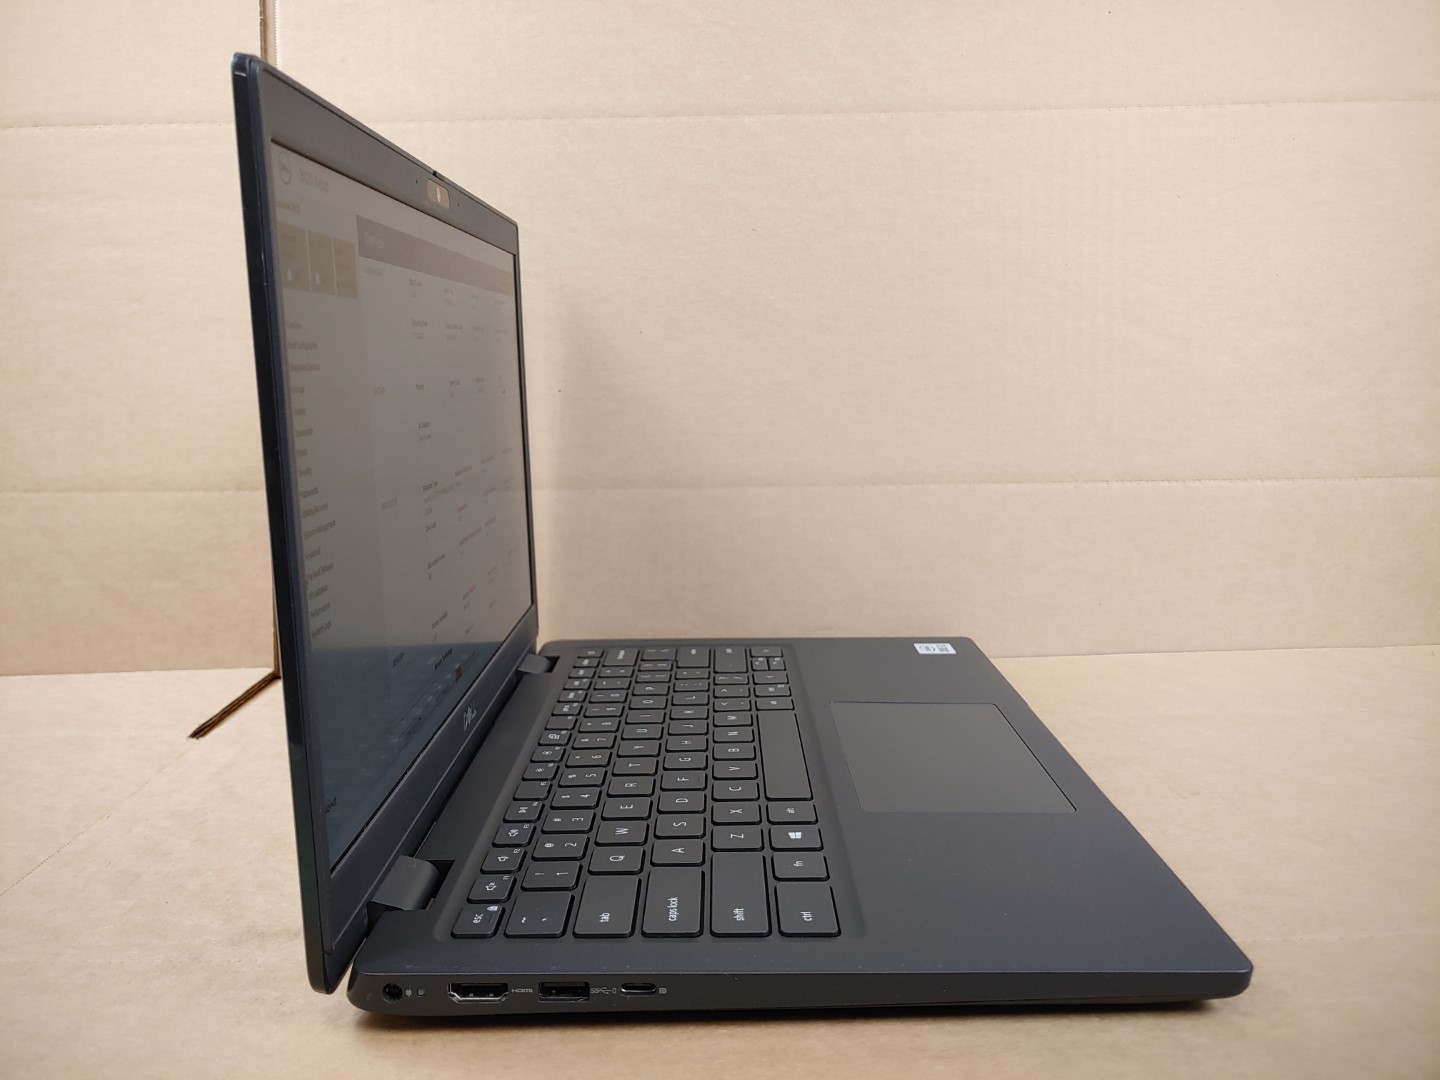 we have added actual images to this listing of the Dell Latitude you would receive. **NO POWER ADAPTER / NO SSD or HDD/ NO OS**Item Specifics: MPN : Latitude 3420UPC : N/AType : LaptopBrand : DellProduct Line : LatitudeModel : Latitude 3420Operating System : N/AScreen Size : 14-inch TouchscreenProcessor Type : Intel Core i3-1005G1 10th GenProcessor Speed : 1.20GHzGraphics Processing Type : Intel(R) UHD GraphicsMemory : 4GBHard Drive Capacity : N/A - 1